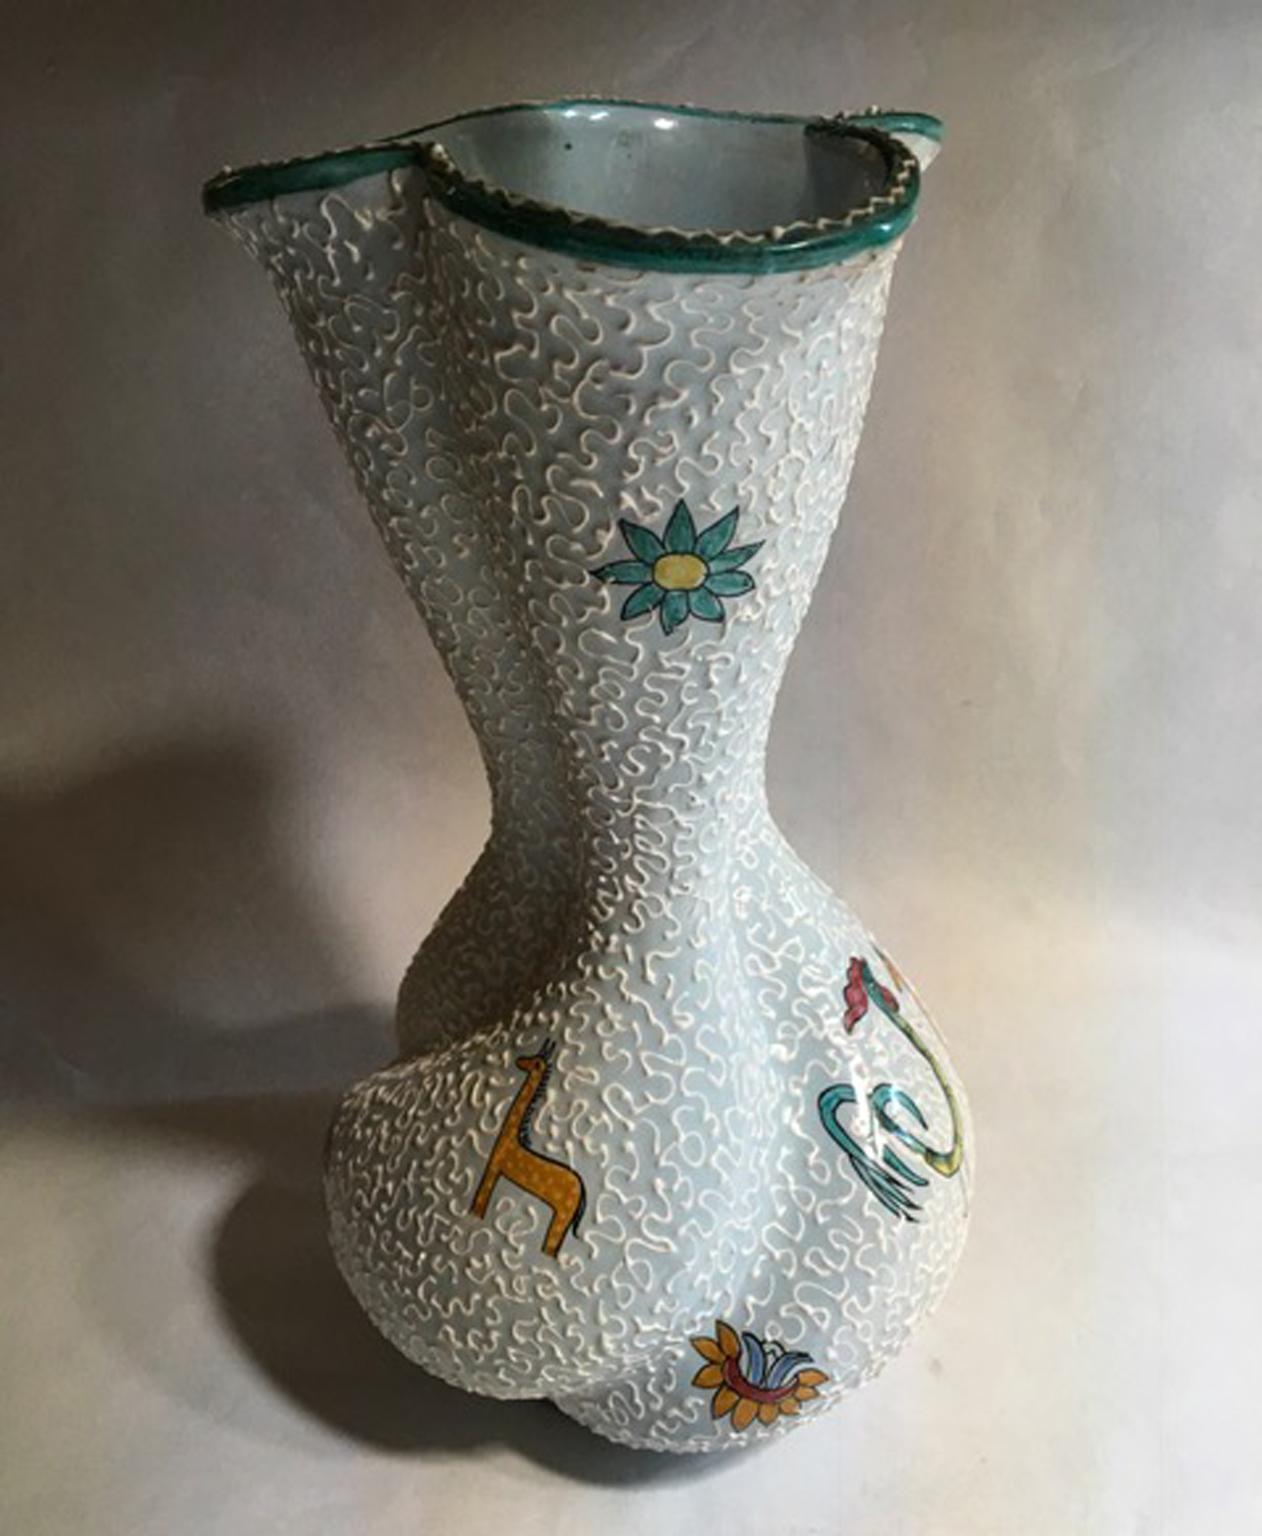 Italian design 1960 white enameled ceramic vase with flowers and animals drawings in midcentury style similar to Gio Ponti style.

This very nice vase is made by Deruta, an Italian factory, in a sculptural shape, similar to Gio Ponti style, typical